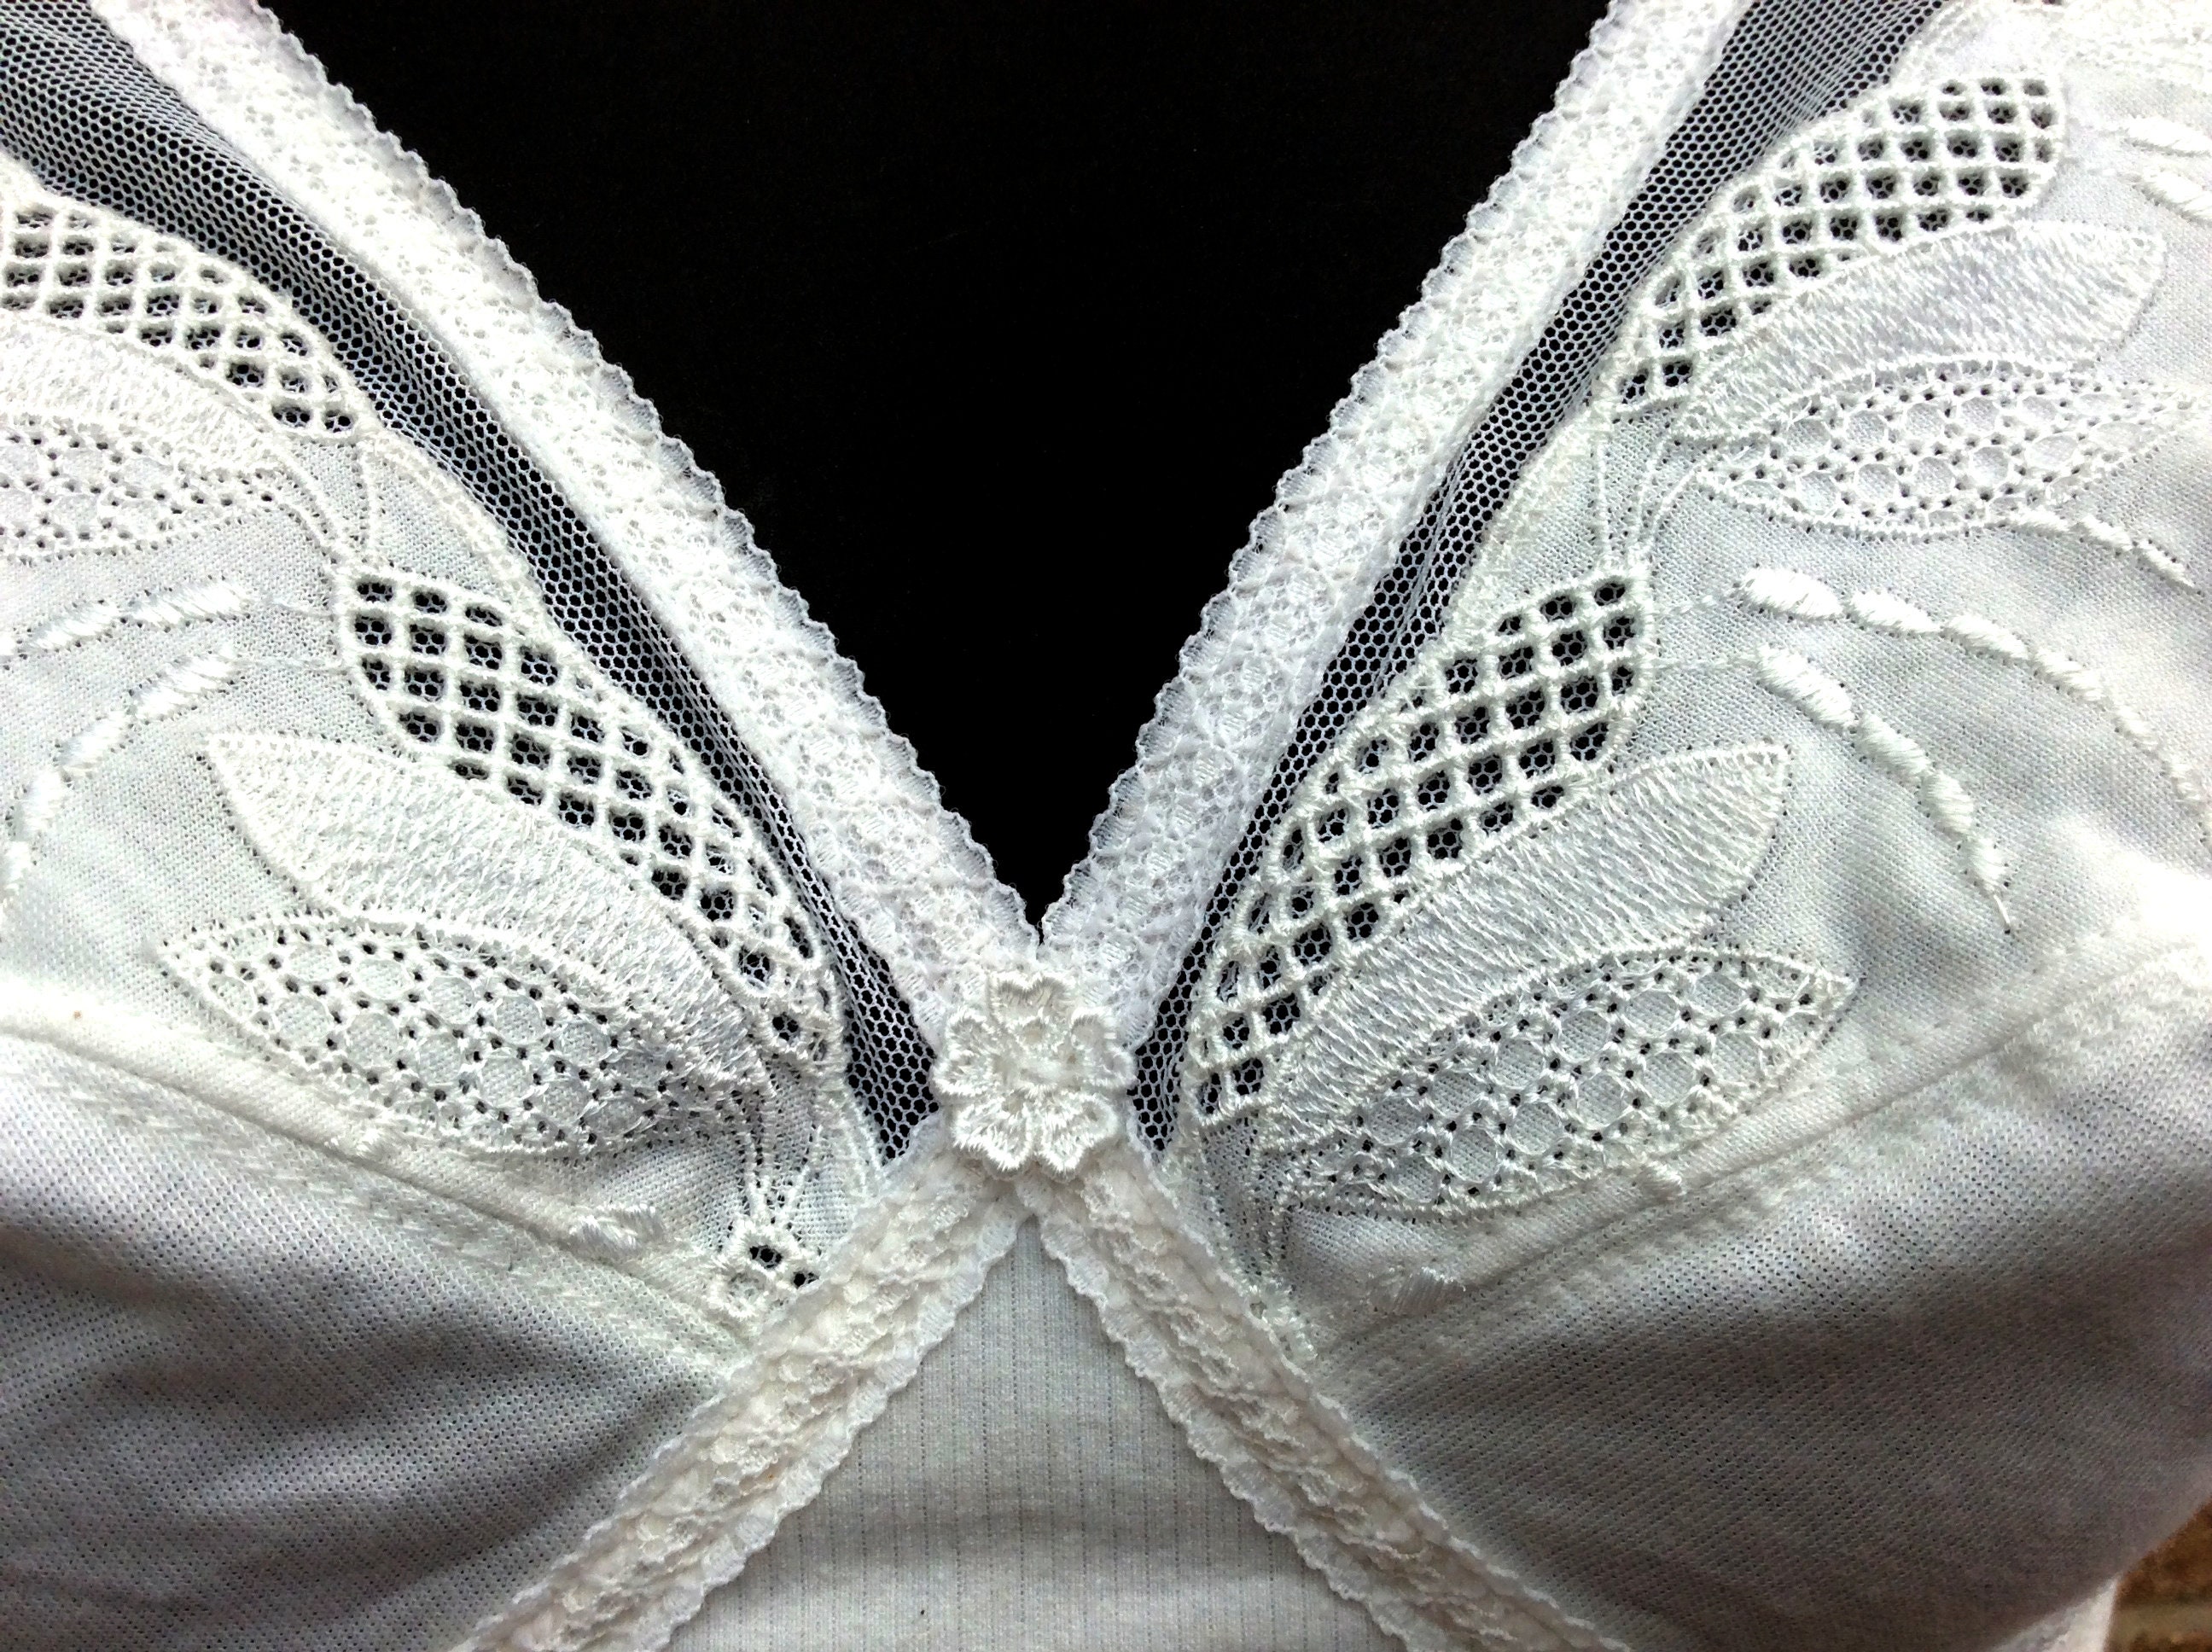 Vintage Playtex Corselette Girdle Bodysuit 34B Corset White Cotton 80s Lace  Mesh Peek-a-boo Embroidery Detail Hook Closure Burlesque Pin Up 